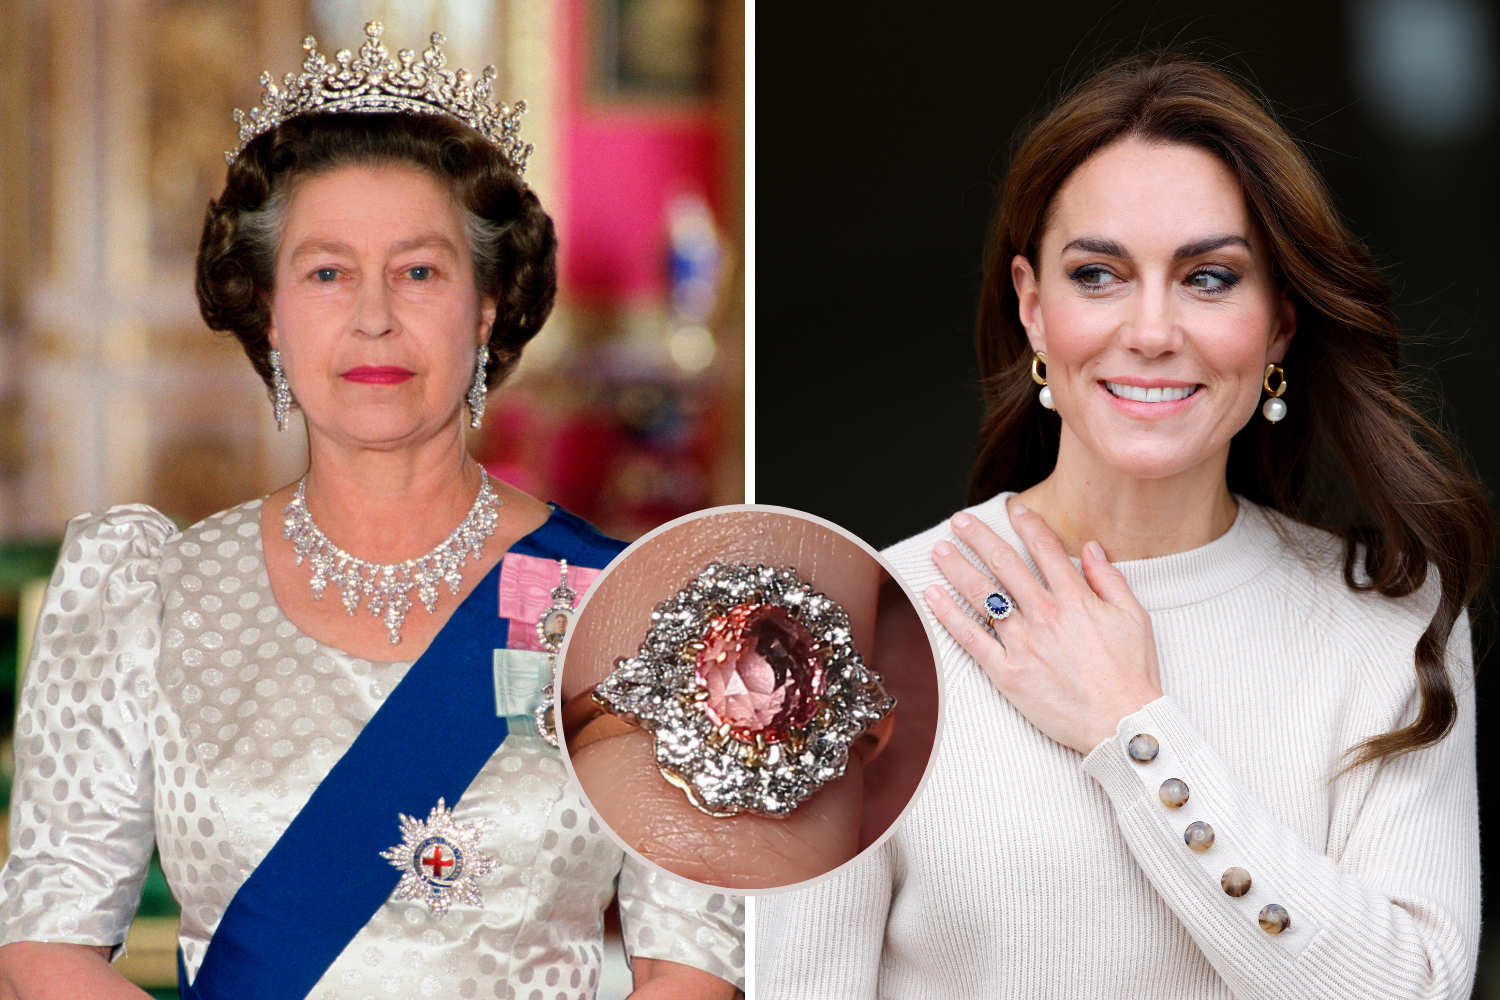 Kate Middleton and Meghan Markle engagement ring and wedding ring values  compared with other royals | Metro News